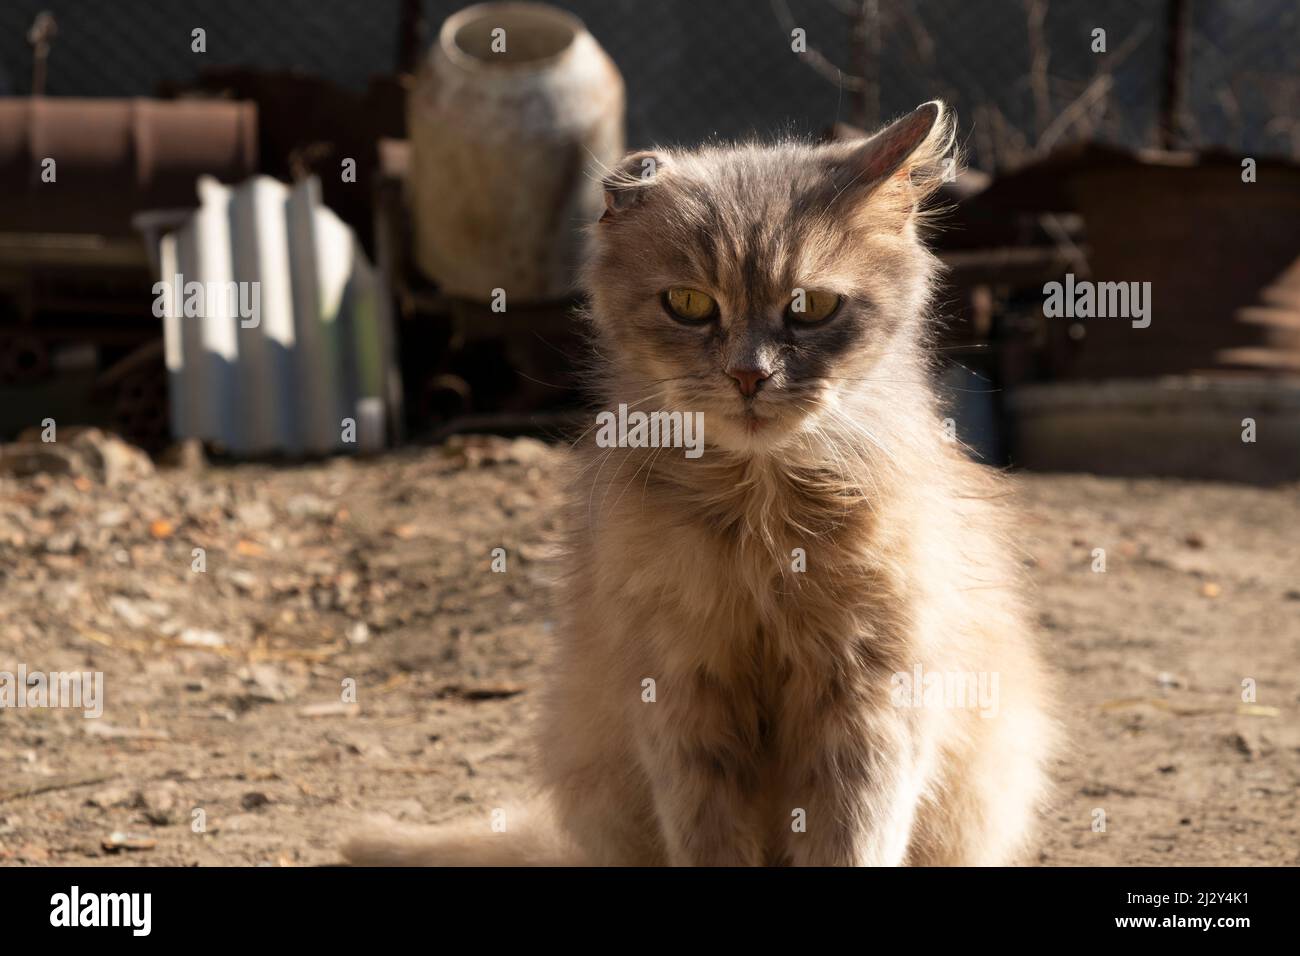 cat with one ear basking in the sun. Stock Photo